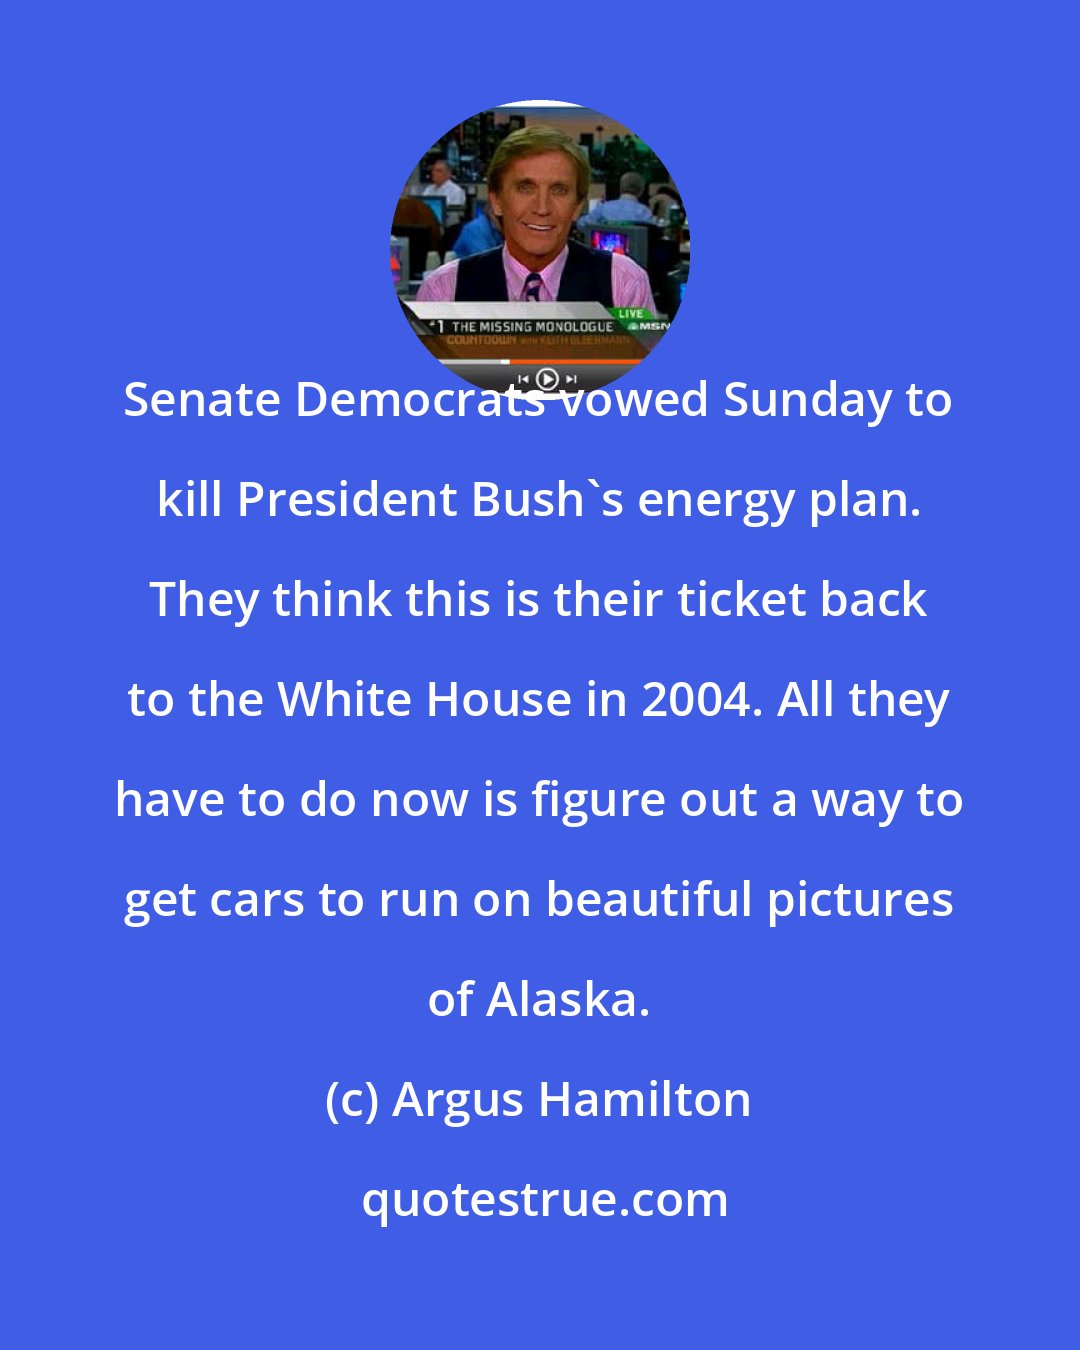 Argus Hamilton: Senate Democrats vowed Sunday to kill President Bush's energy plan. They think this is their ticket back to the White House in 2004. All they have to do now is figure out a way to get cars to run on beautiful pictures of Alaska.